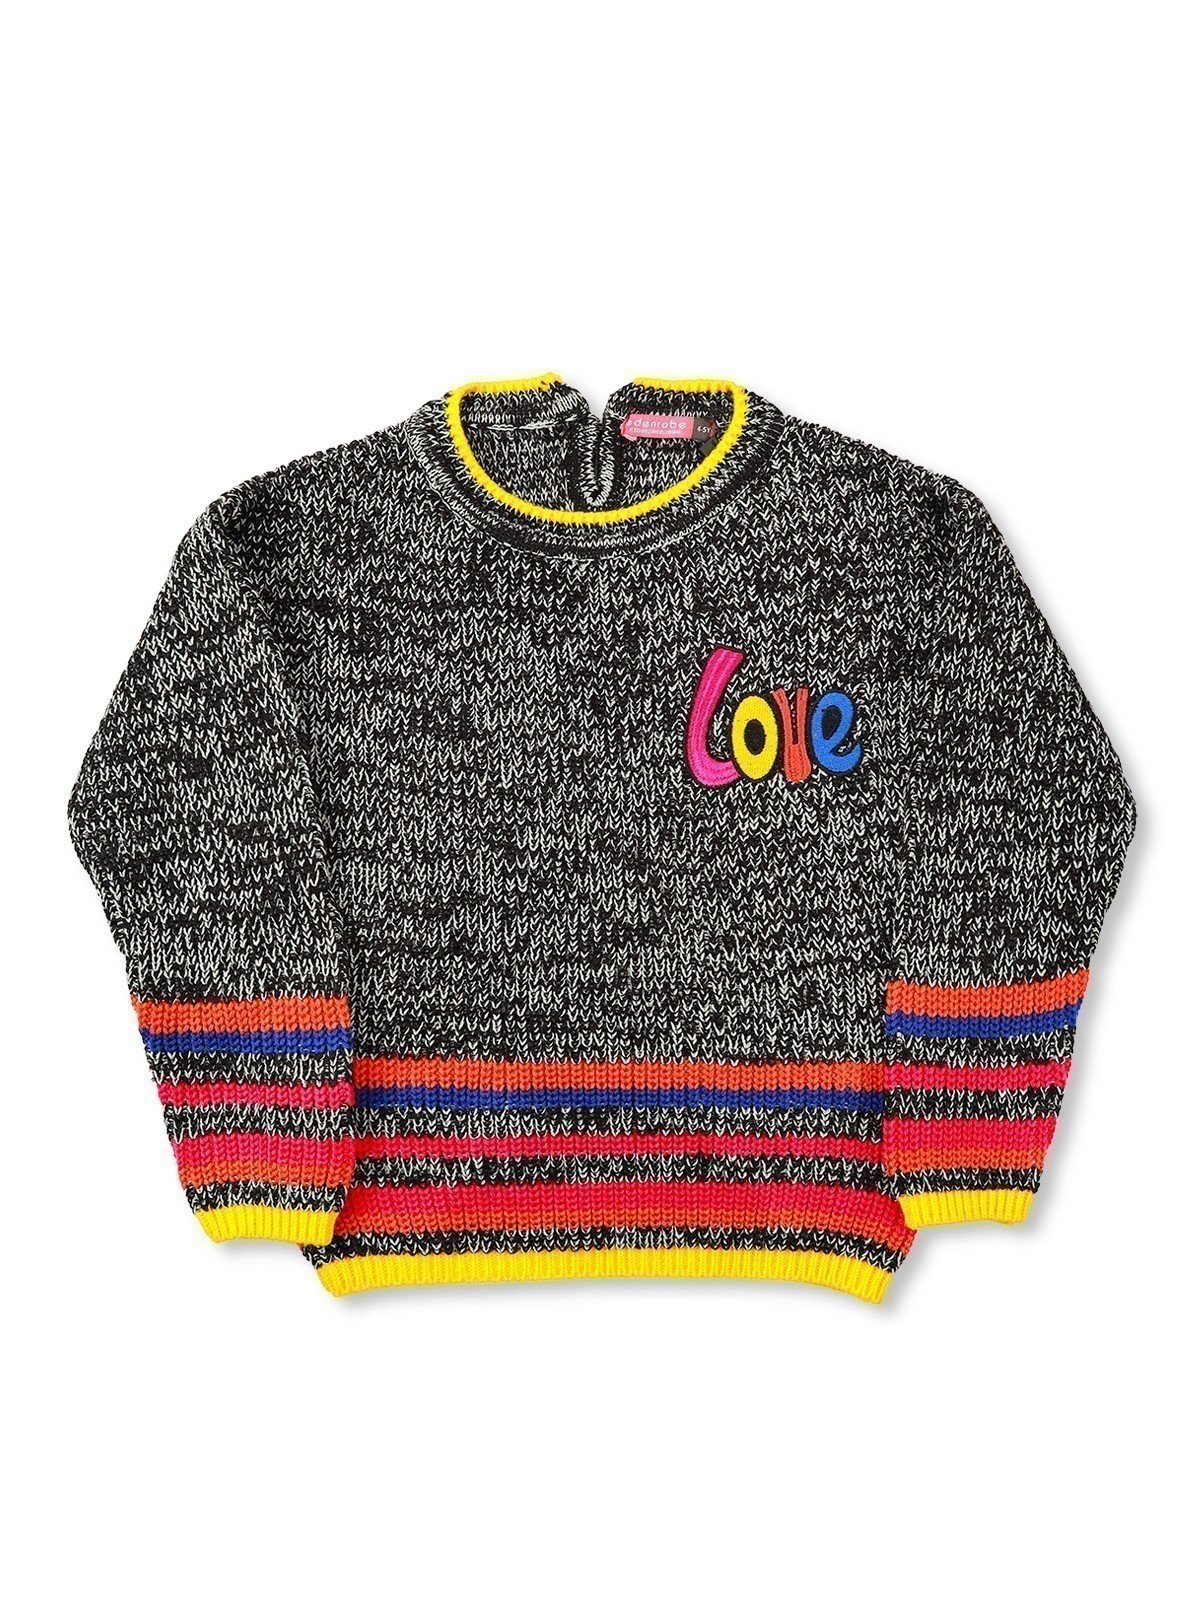 Girl's Charcoal Sweater - EGTSWT21-003